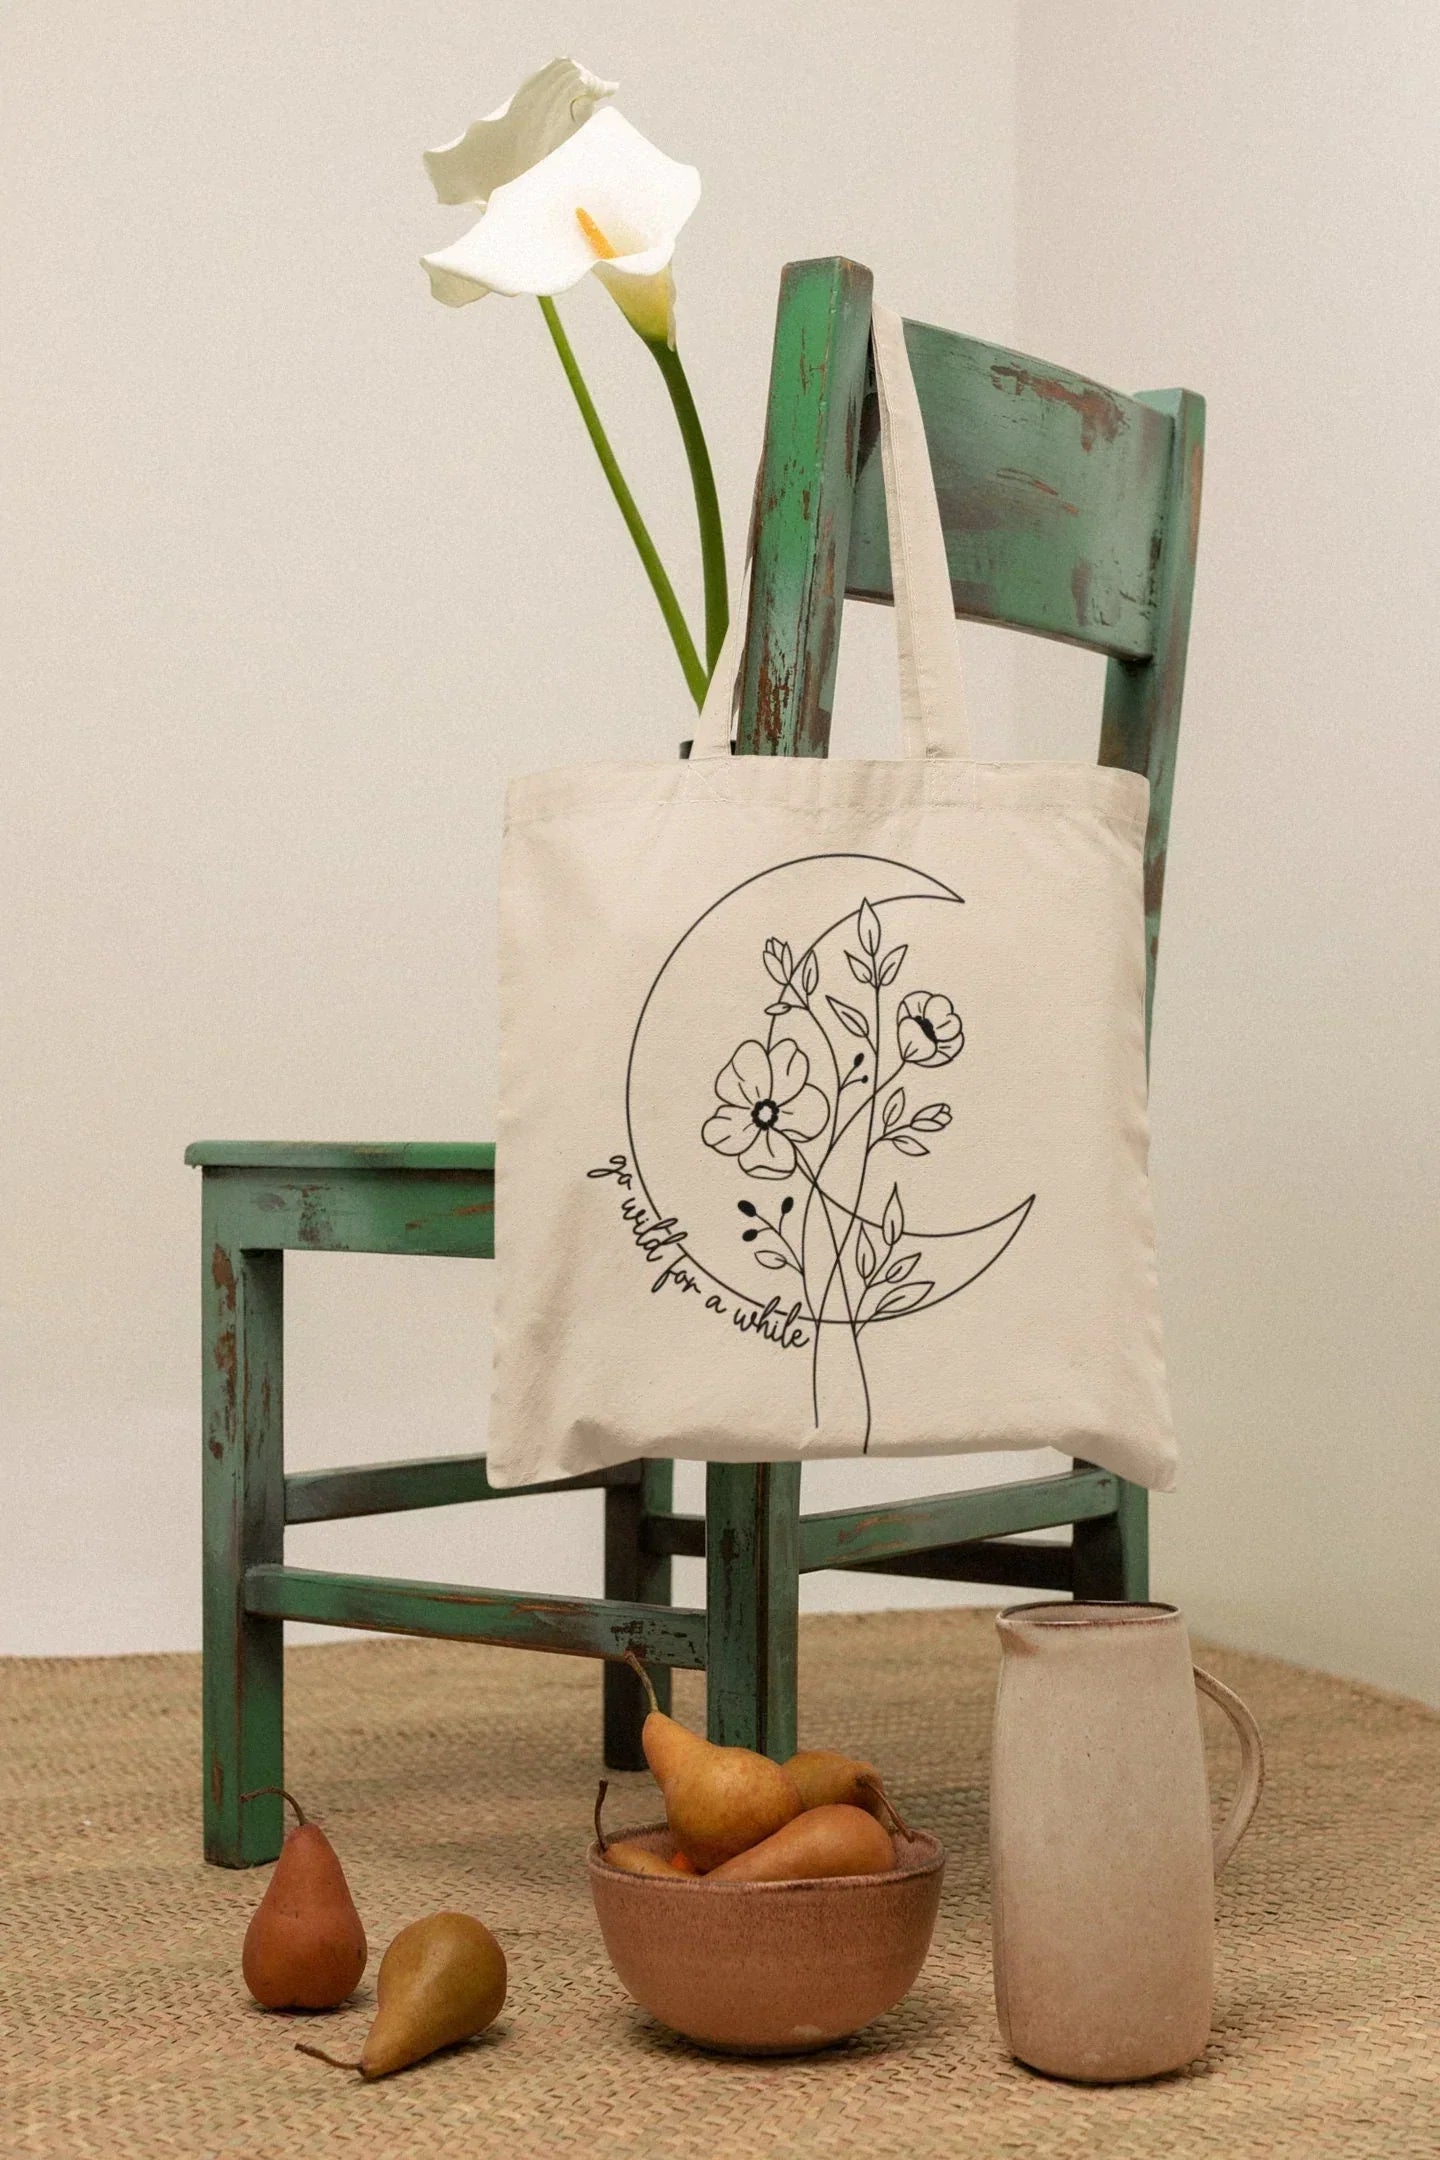 Floral Tote Bag Aesthetic, Moon Reusable Grocery Bag, Large Tarot Tote Bag, Cute Retro Nature Tote Bag, Wildflower Canvas Bag, Sunflower